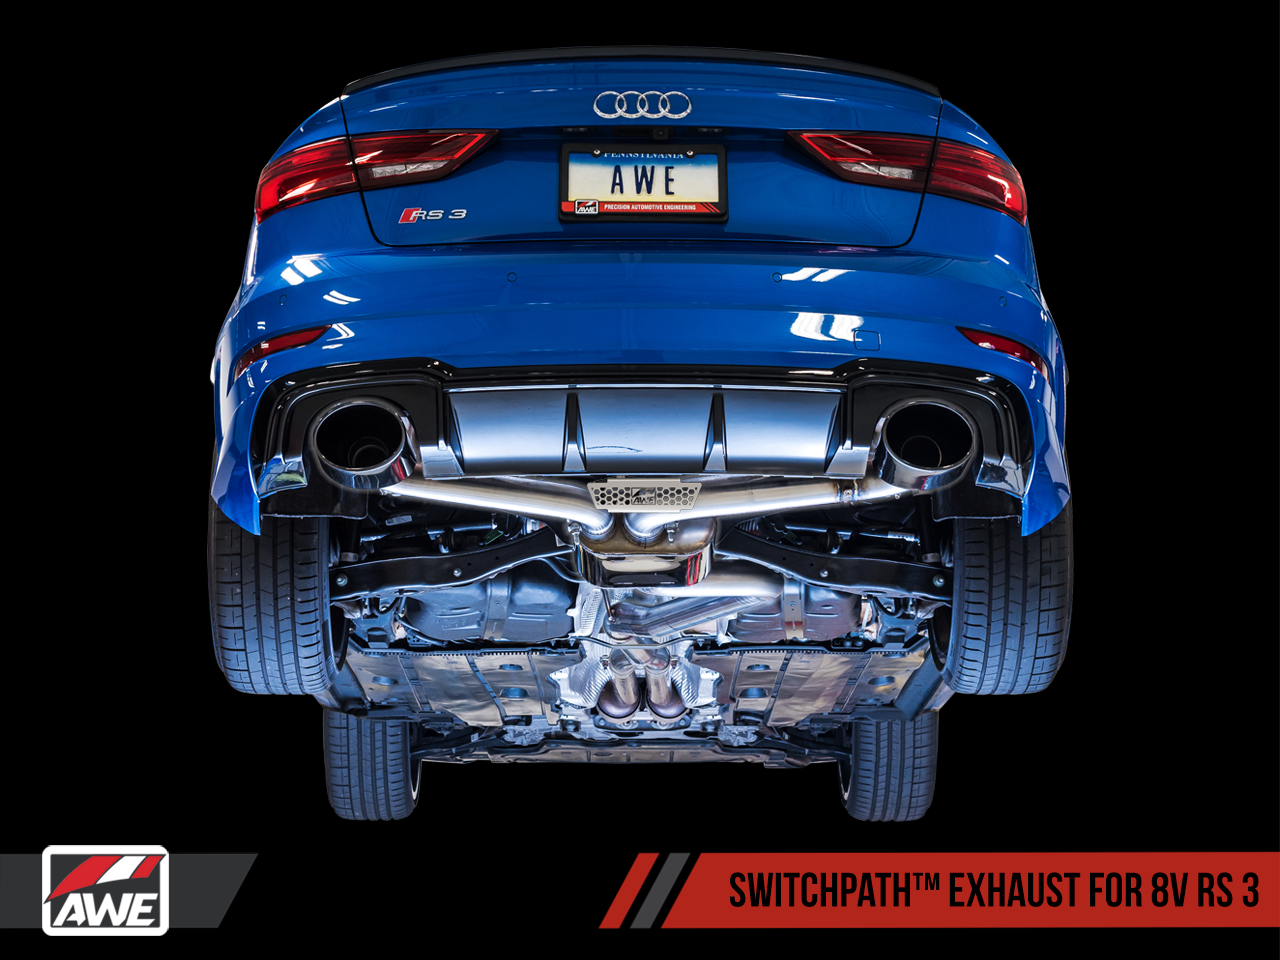  AWE Exhaust Suite for Audi 8V RS 3 2.5T